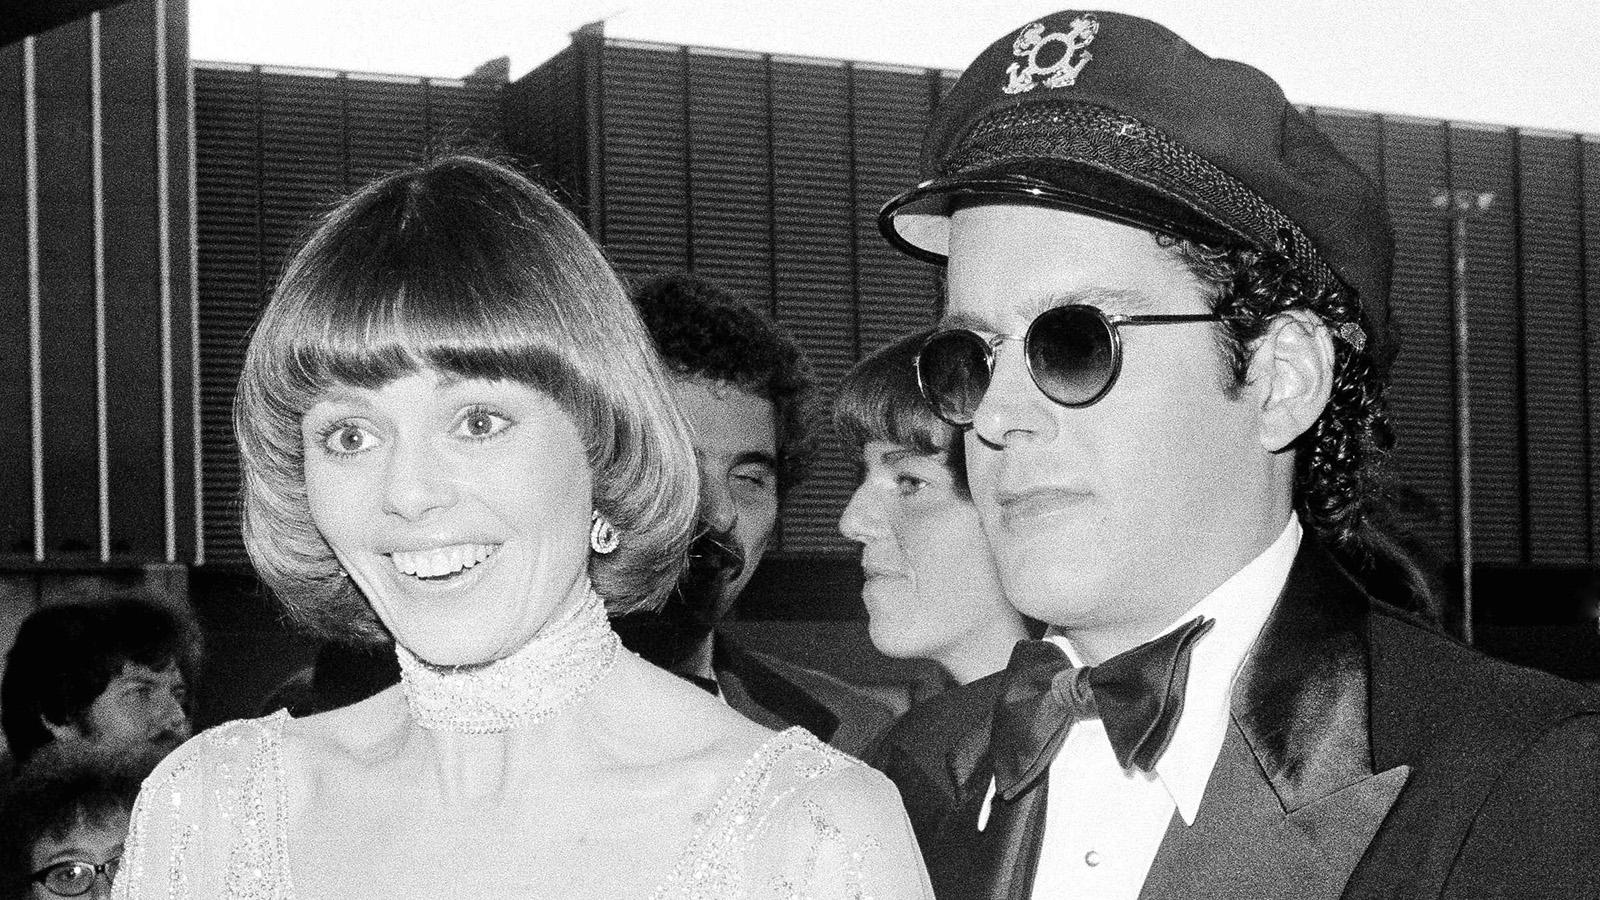  Captain and Tennille 1976.